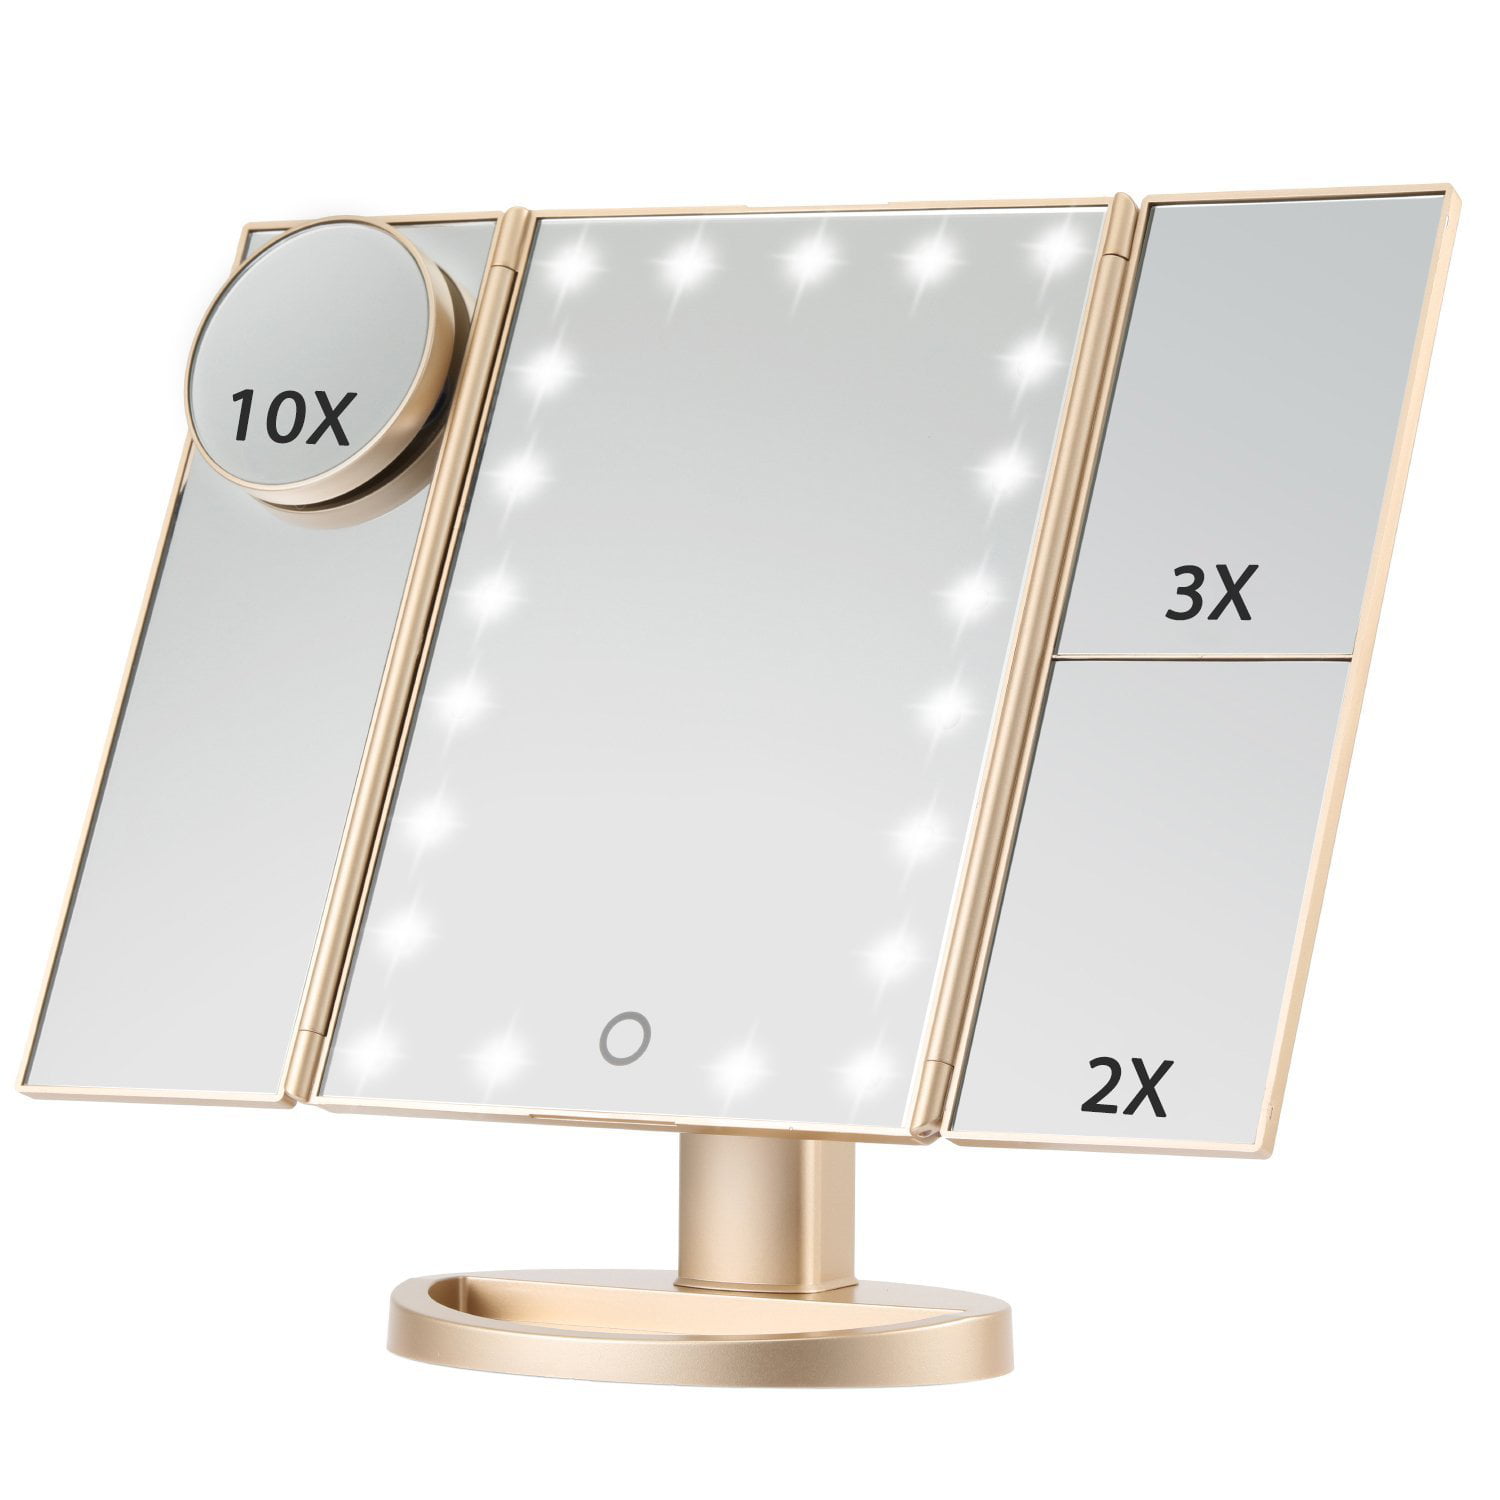 Led Lighted Makeup Mirror, Magicfly 10X 3X 2X 1X